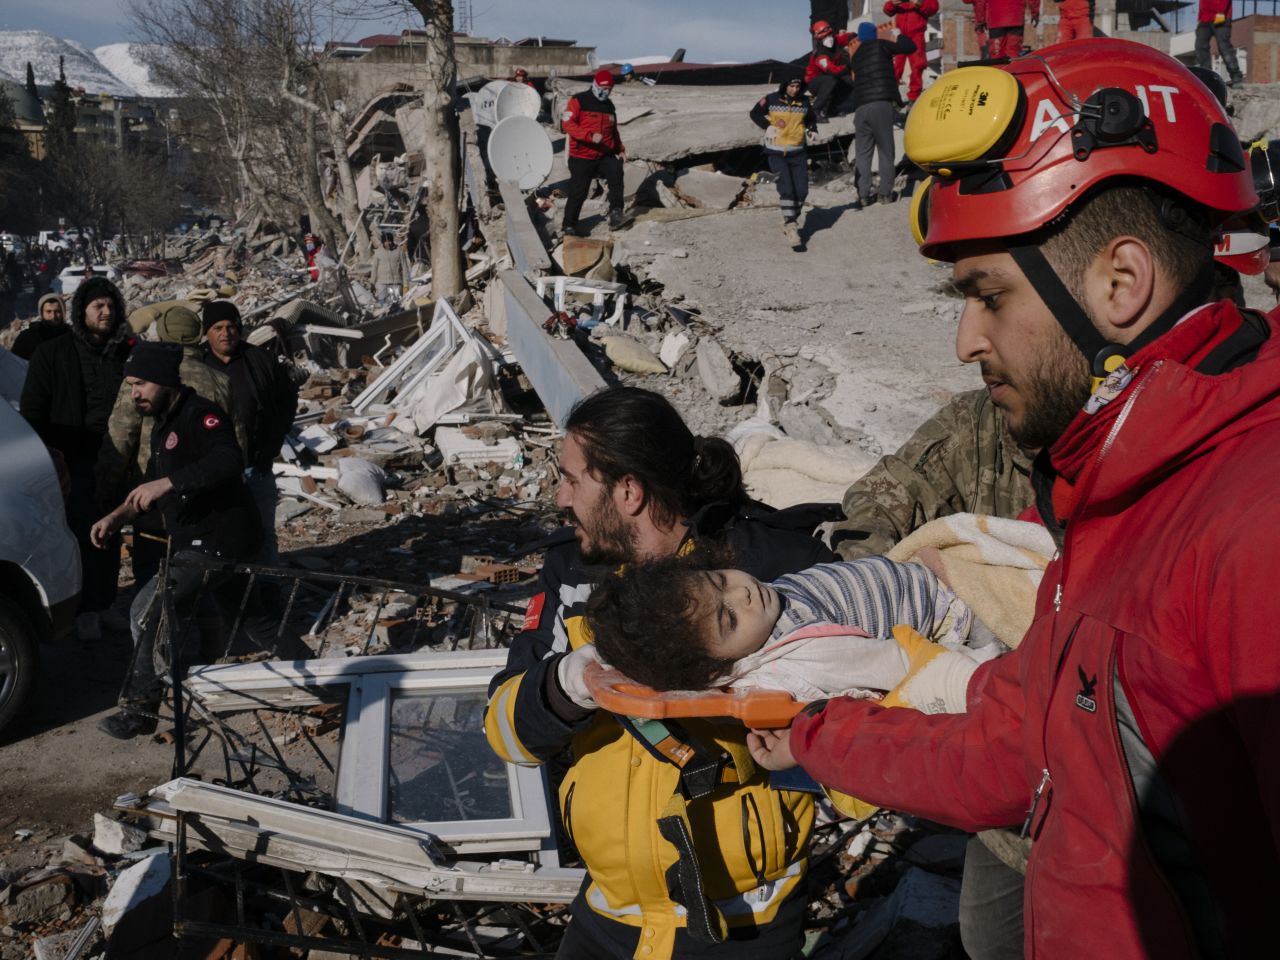 Rescue workers carry Vacit Amuri, a 3-year-old girl who was found alive in the rubble of a collapsed building, in Kahramanmaraş, Turkey, on Tuesday, February 7.